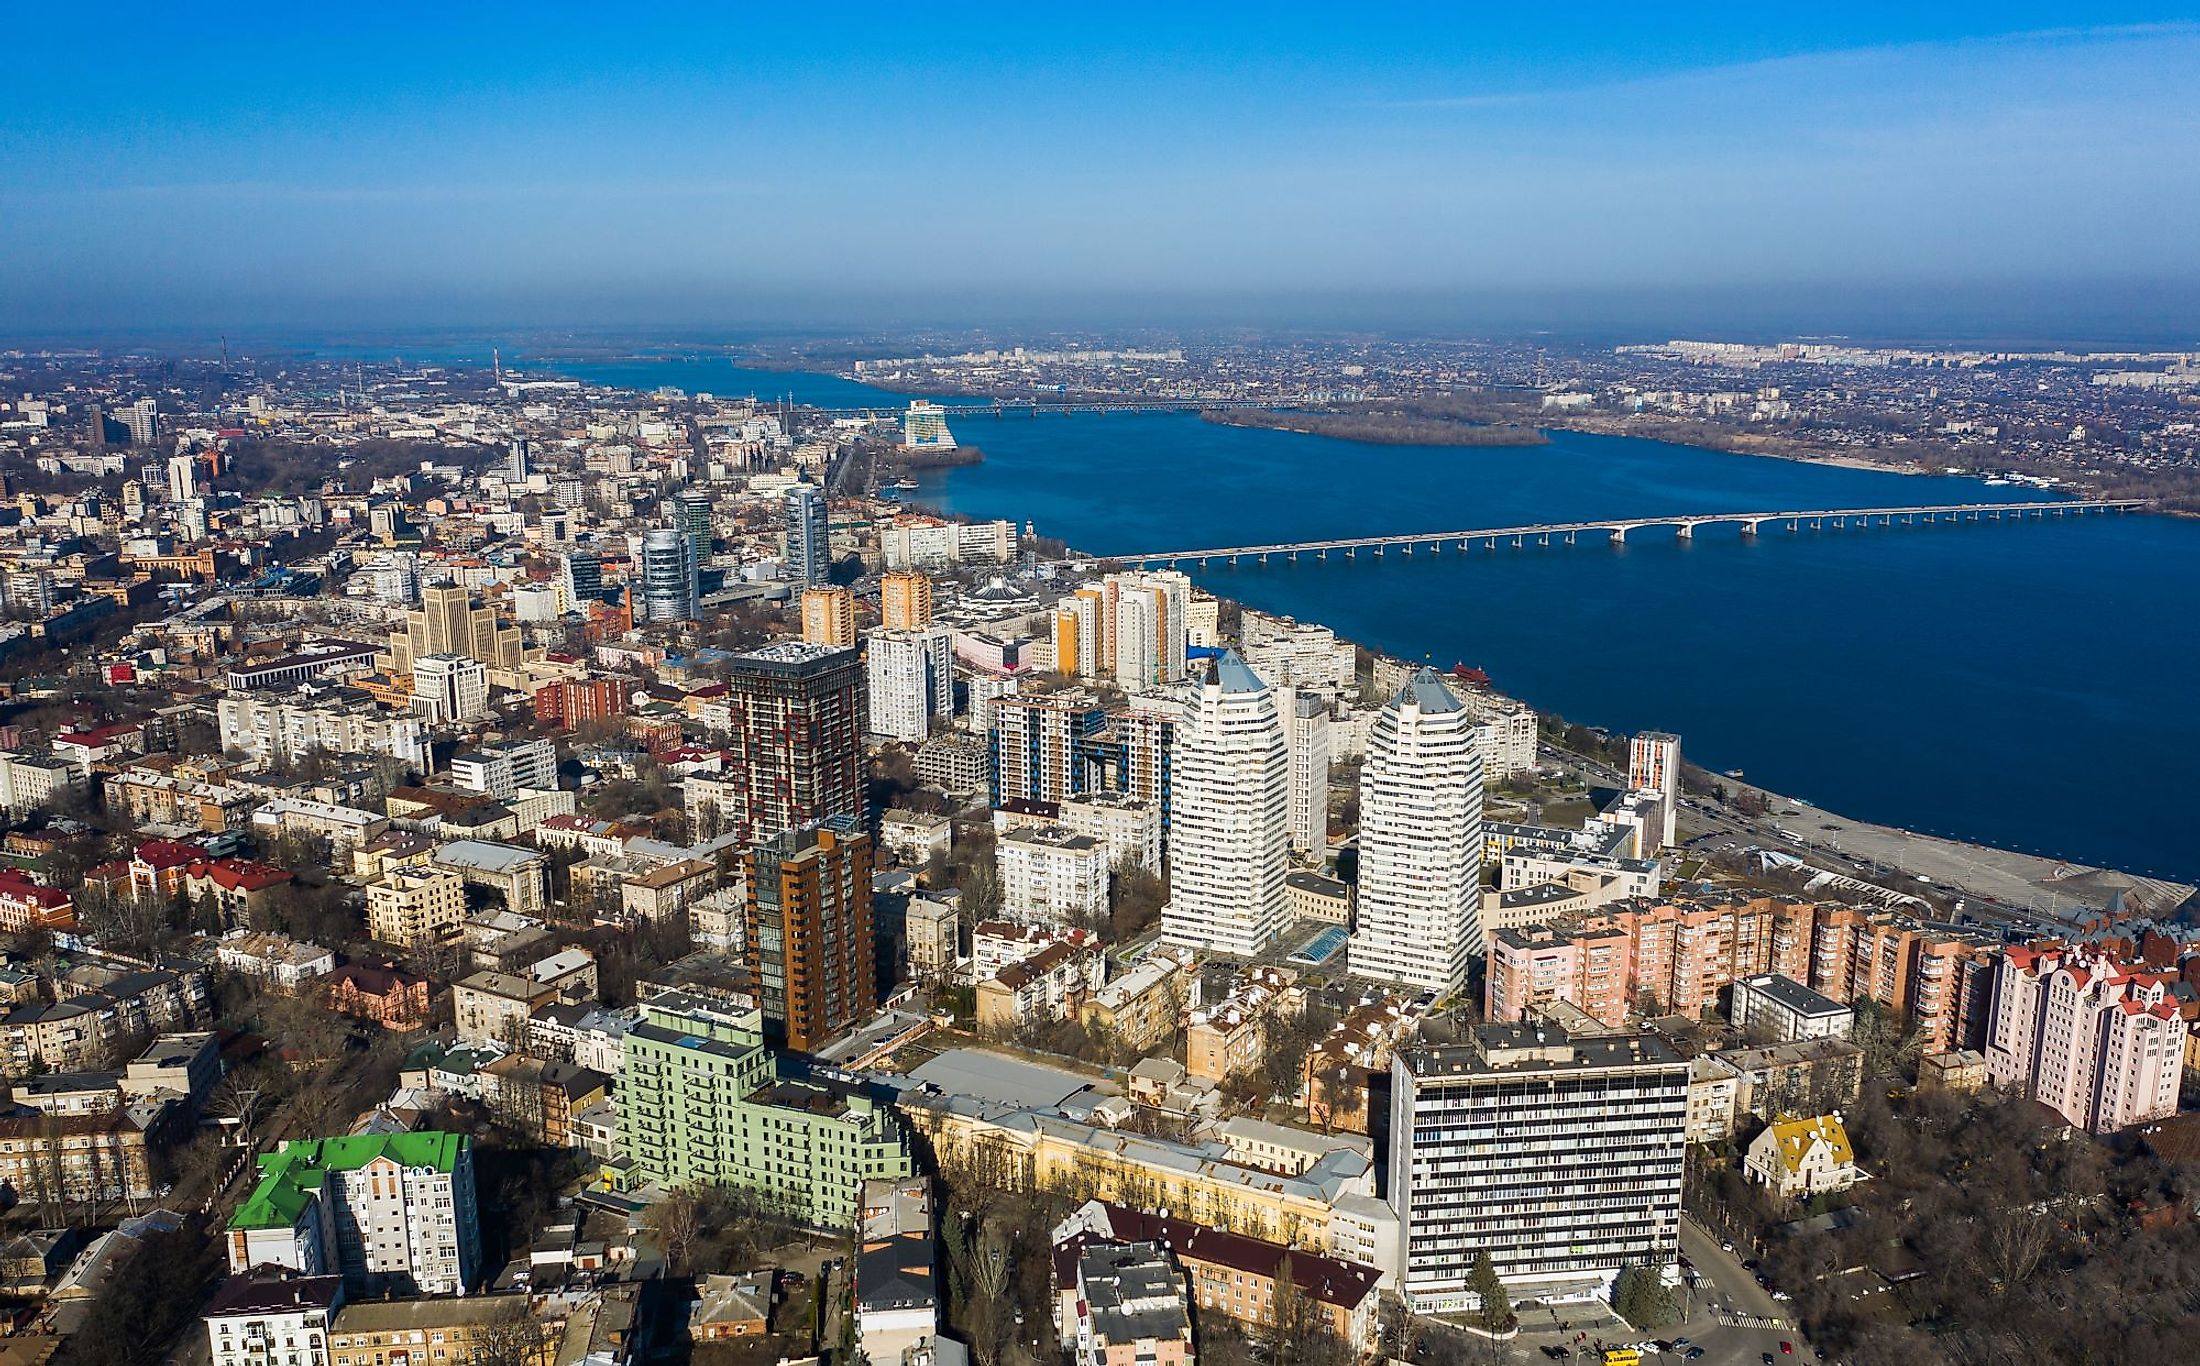 Aerial view of Dnipro city with the Dnieper River and different building blocks. 